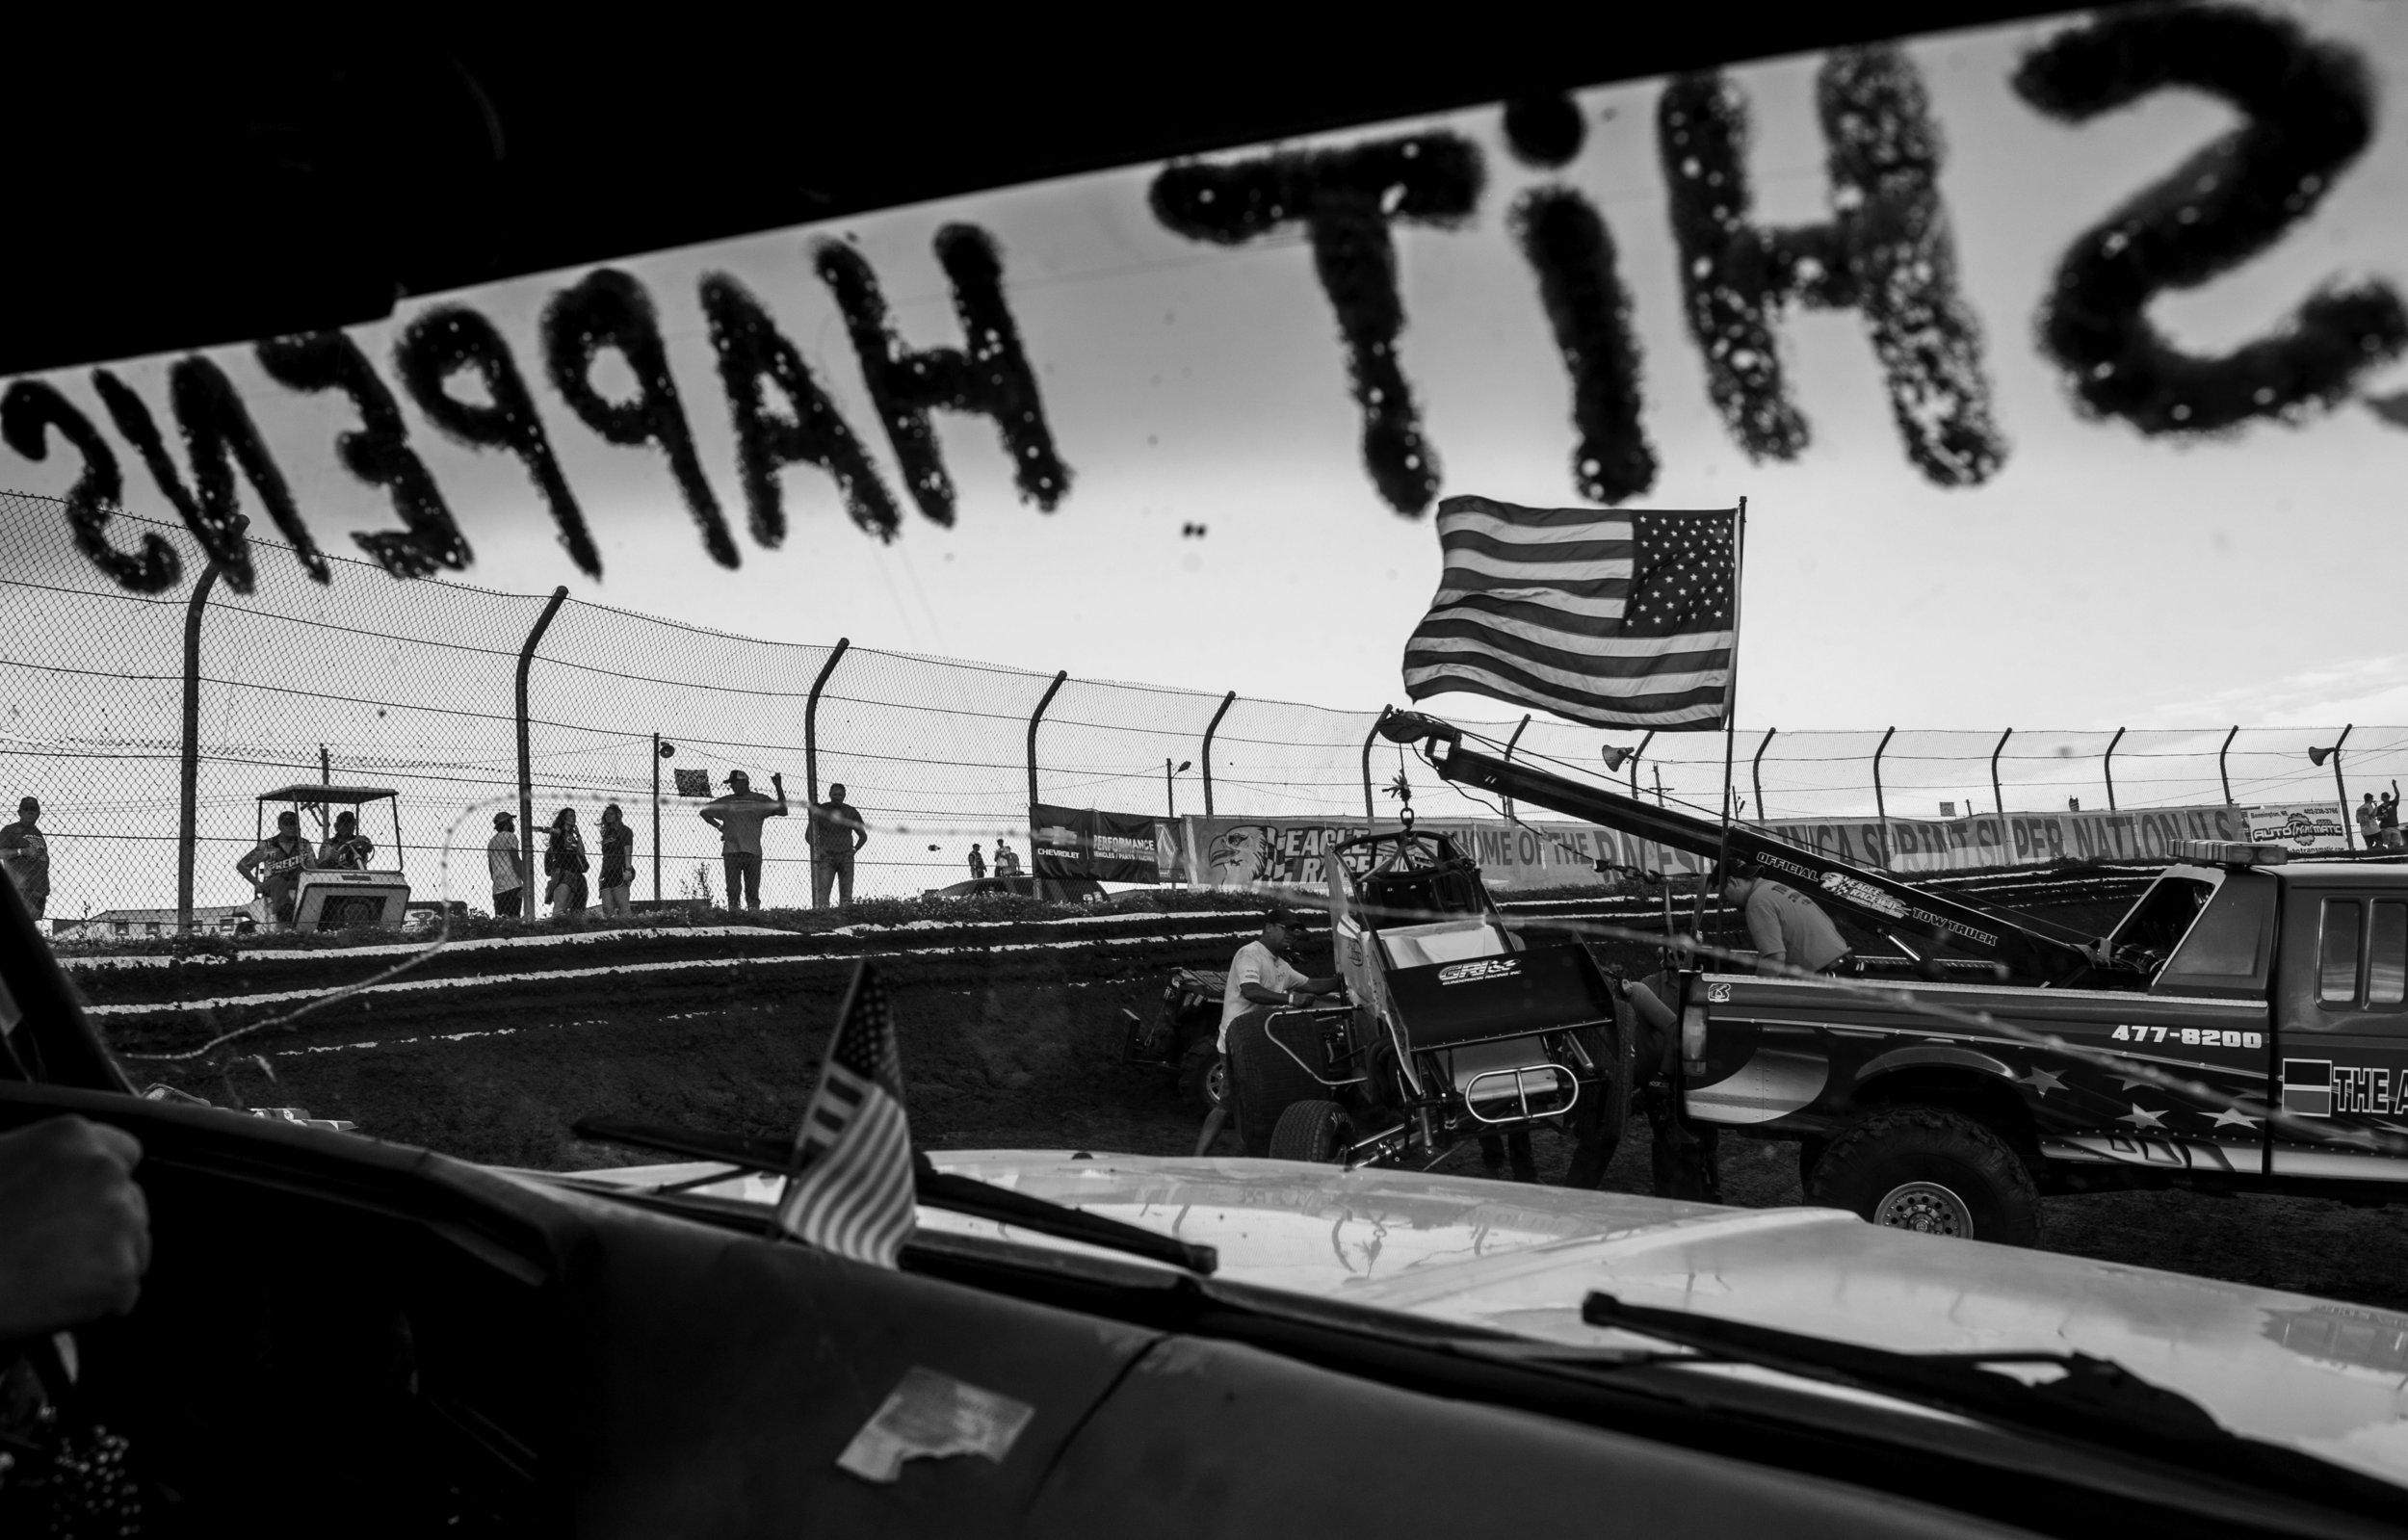  From the view of a push truck crew's window, a trucks tows Clint Benson's spun out car during the hot laps of the World of Outlaws sprint race June 13, 2017 at Eagle Raceway in Eagle, Neb. 